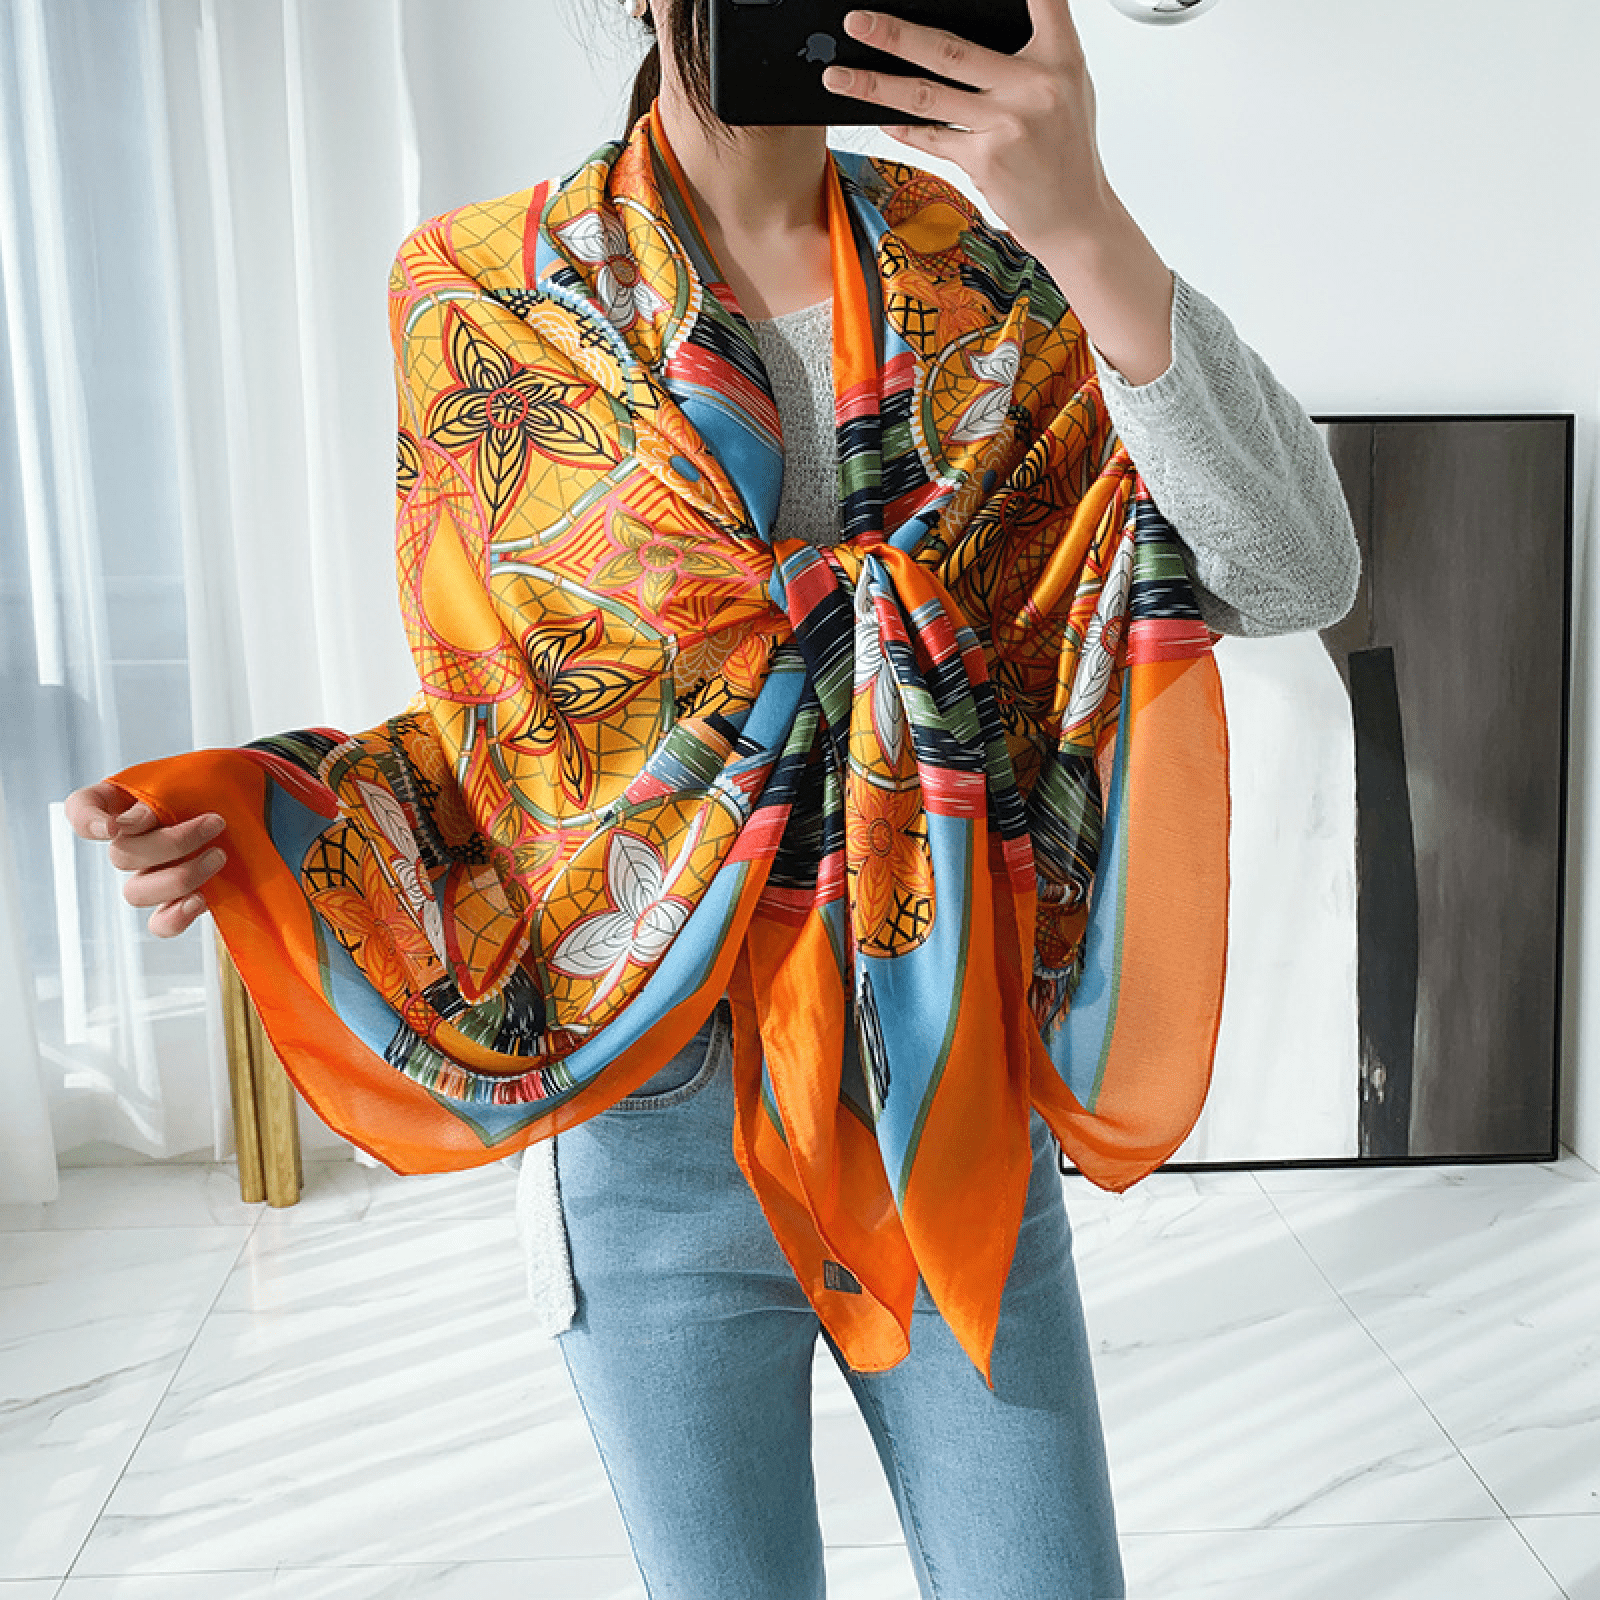 100% Mulberry Silk 16mm Skinny Twill scarf Printed Hair Ribbon Bag Handle  Wrap Accessories Tie Neckerchief (Animal Garden), 55inx2.1in (140x5.5 cm)  at  Women's Clothing store